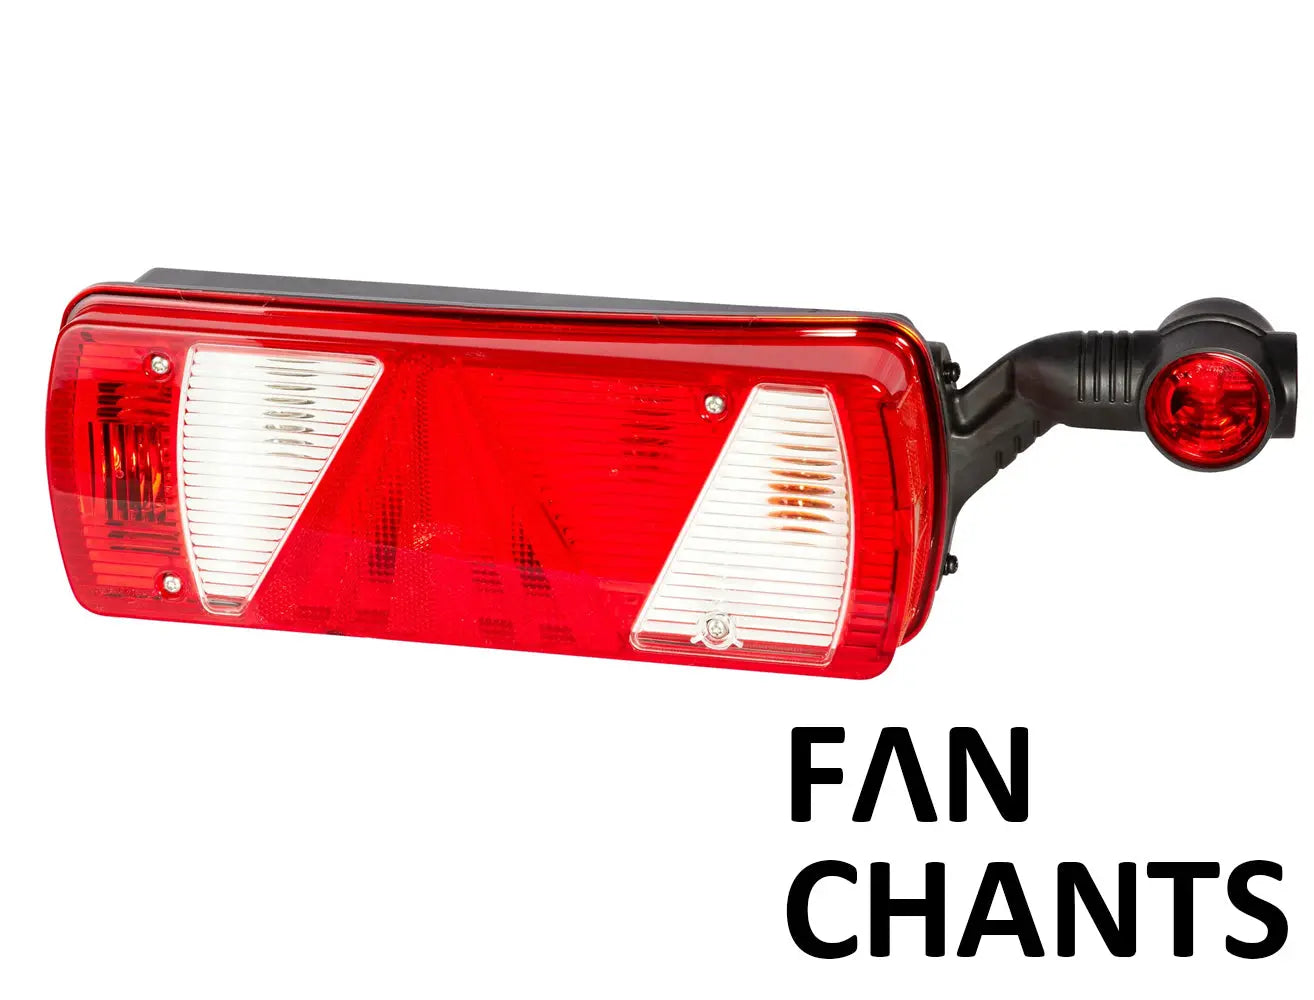 CHINA Factory Wholesale 252910501 252910500 TAIL LAMP RH LH FOR ASPOCK FANCHANTS China Auto Parts Wholesales